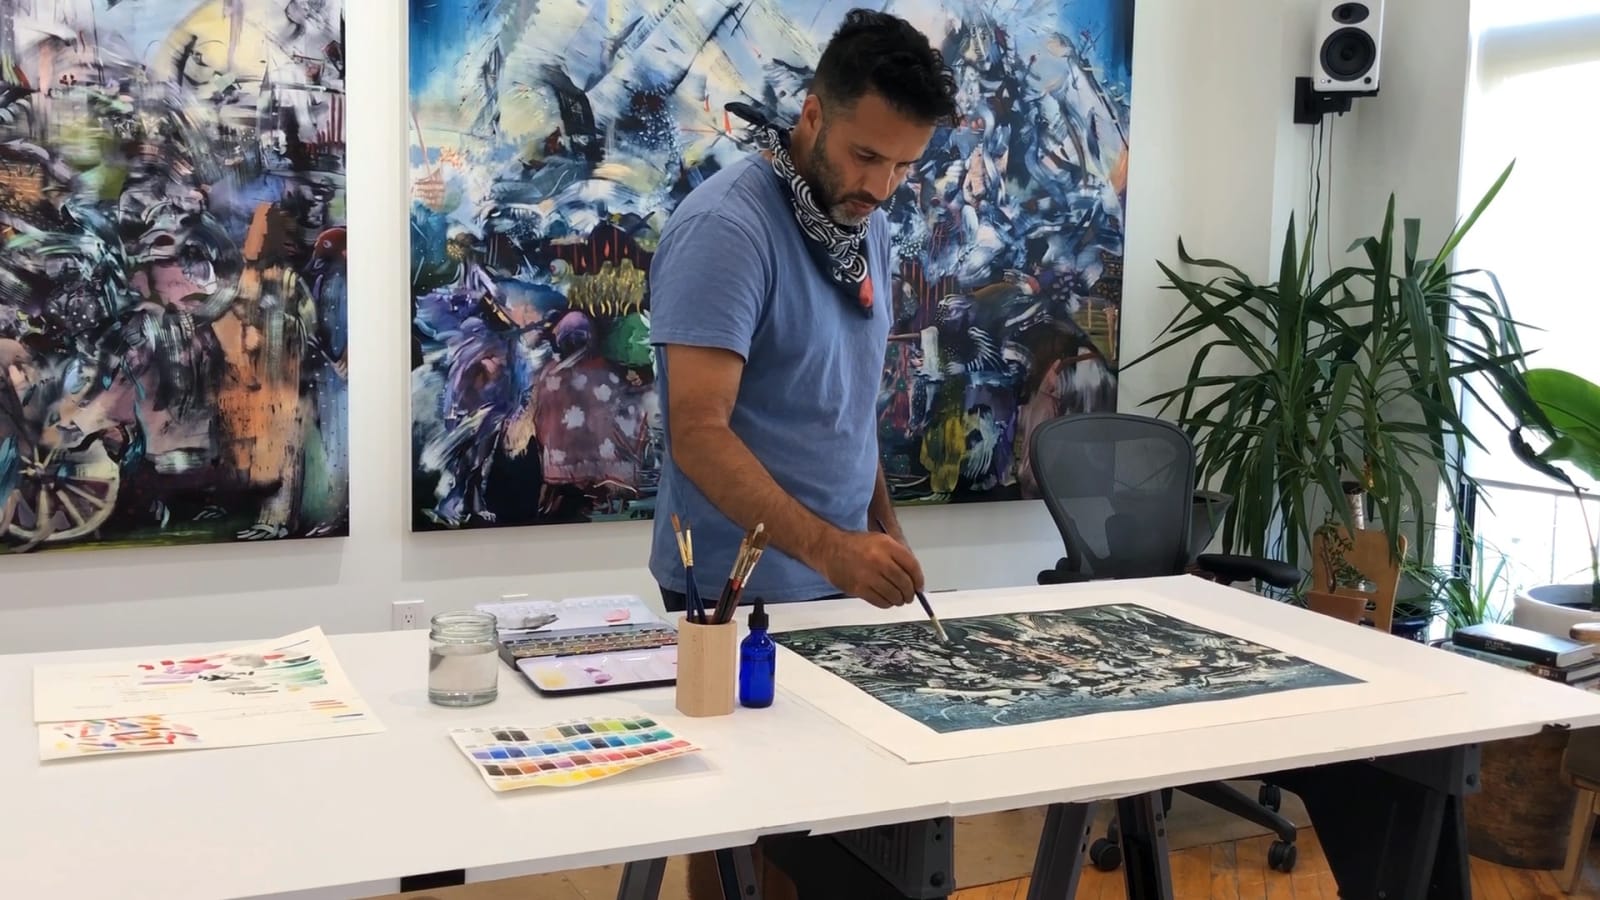 <h6 style="text-align: center;">Ali Banisadr hand-painting his print <i>Nocturne </i>in his studio, New York, 2020.</h6>